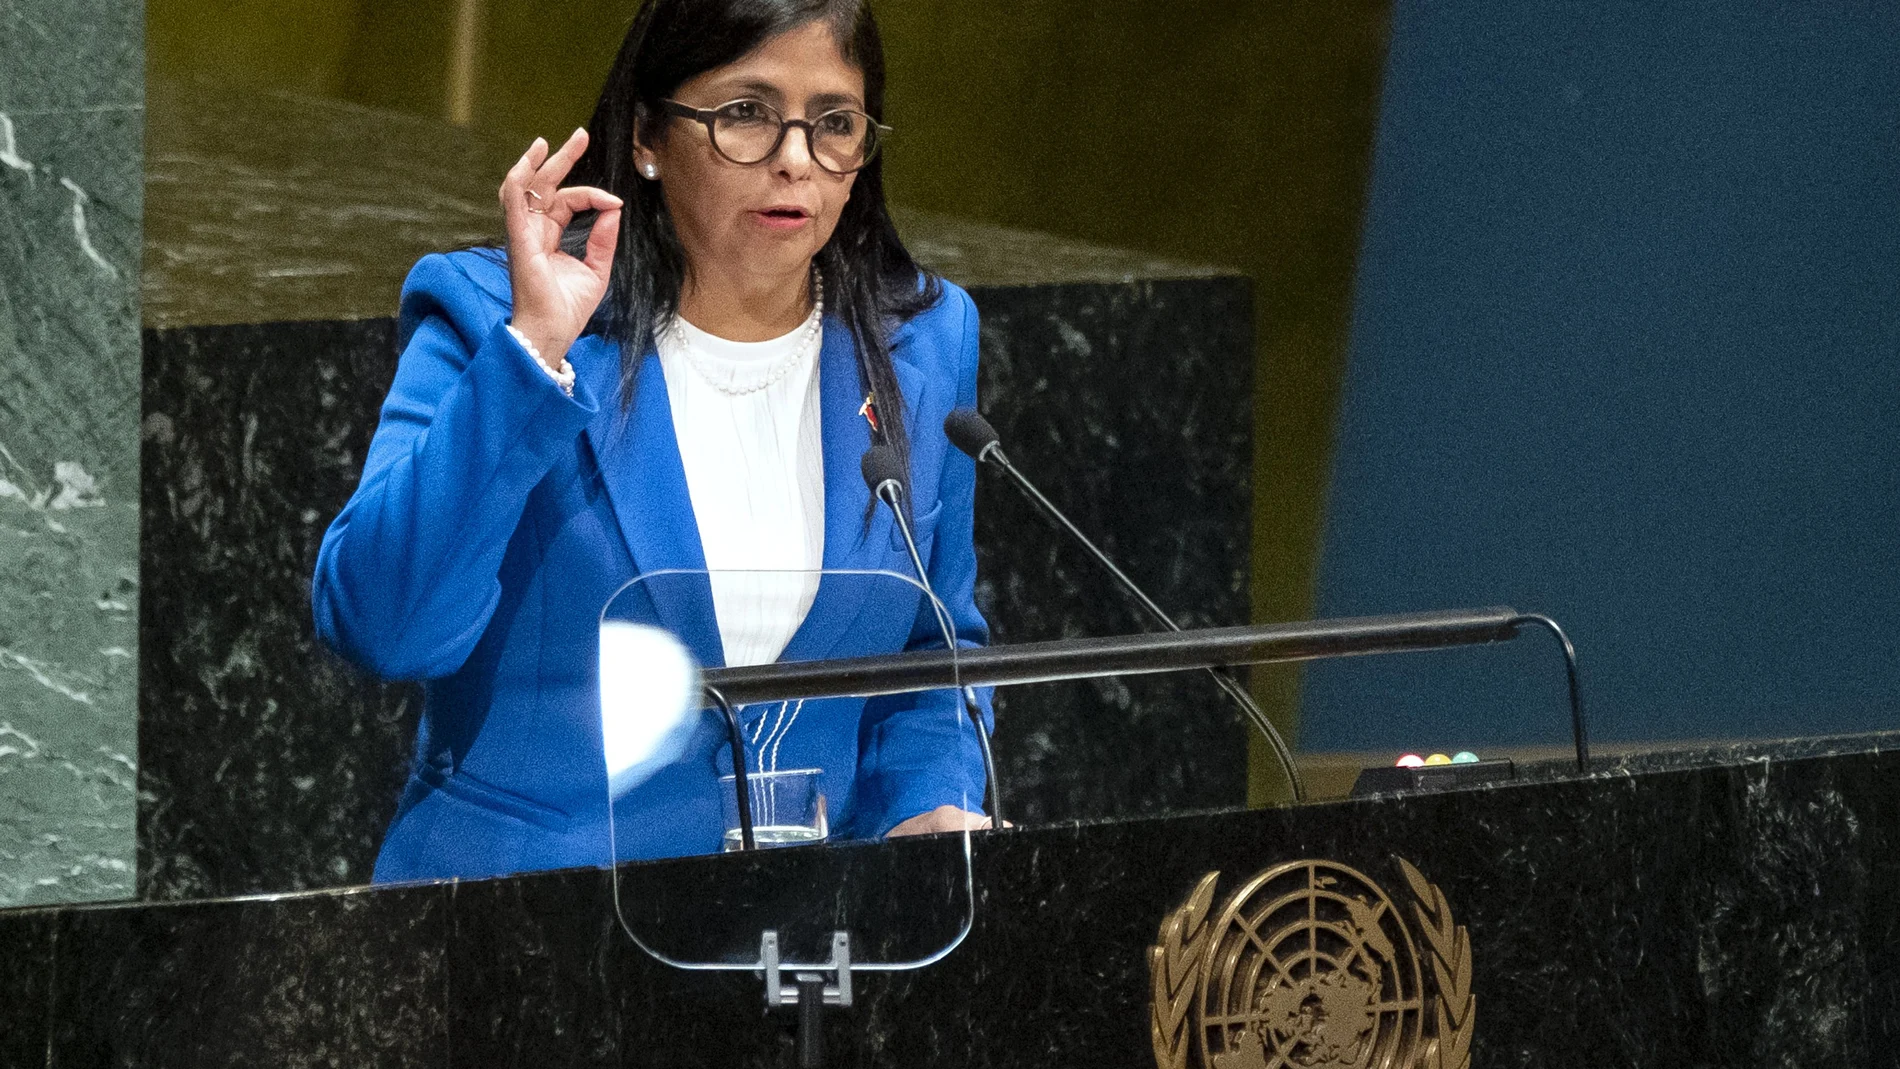 FILE - In this Sept. 27, 2019 file photo, Vice President of Venezuela Delcy Rodriguez addresses the 74th session of the United Nations General Assembly, at the United Nations headquarters. A secretive meeting this week at Madrid's international airport between two prominent officials from Spain and Rodriguez triggered a political storm on Jan. 23, 2020, with conservative parties pressing Spain's left-wing government for full disclosure. (AP Photo/Craig Ruttle, File)